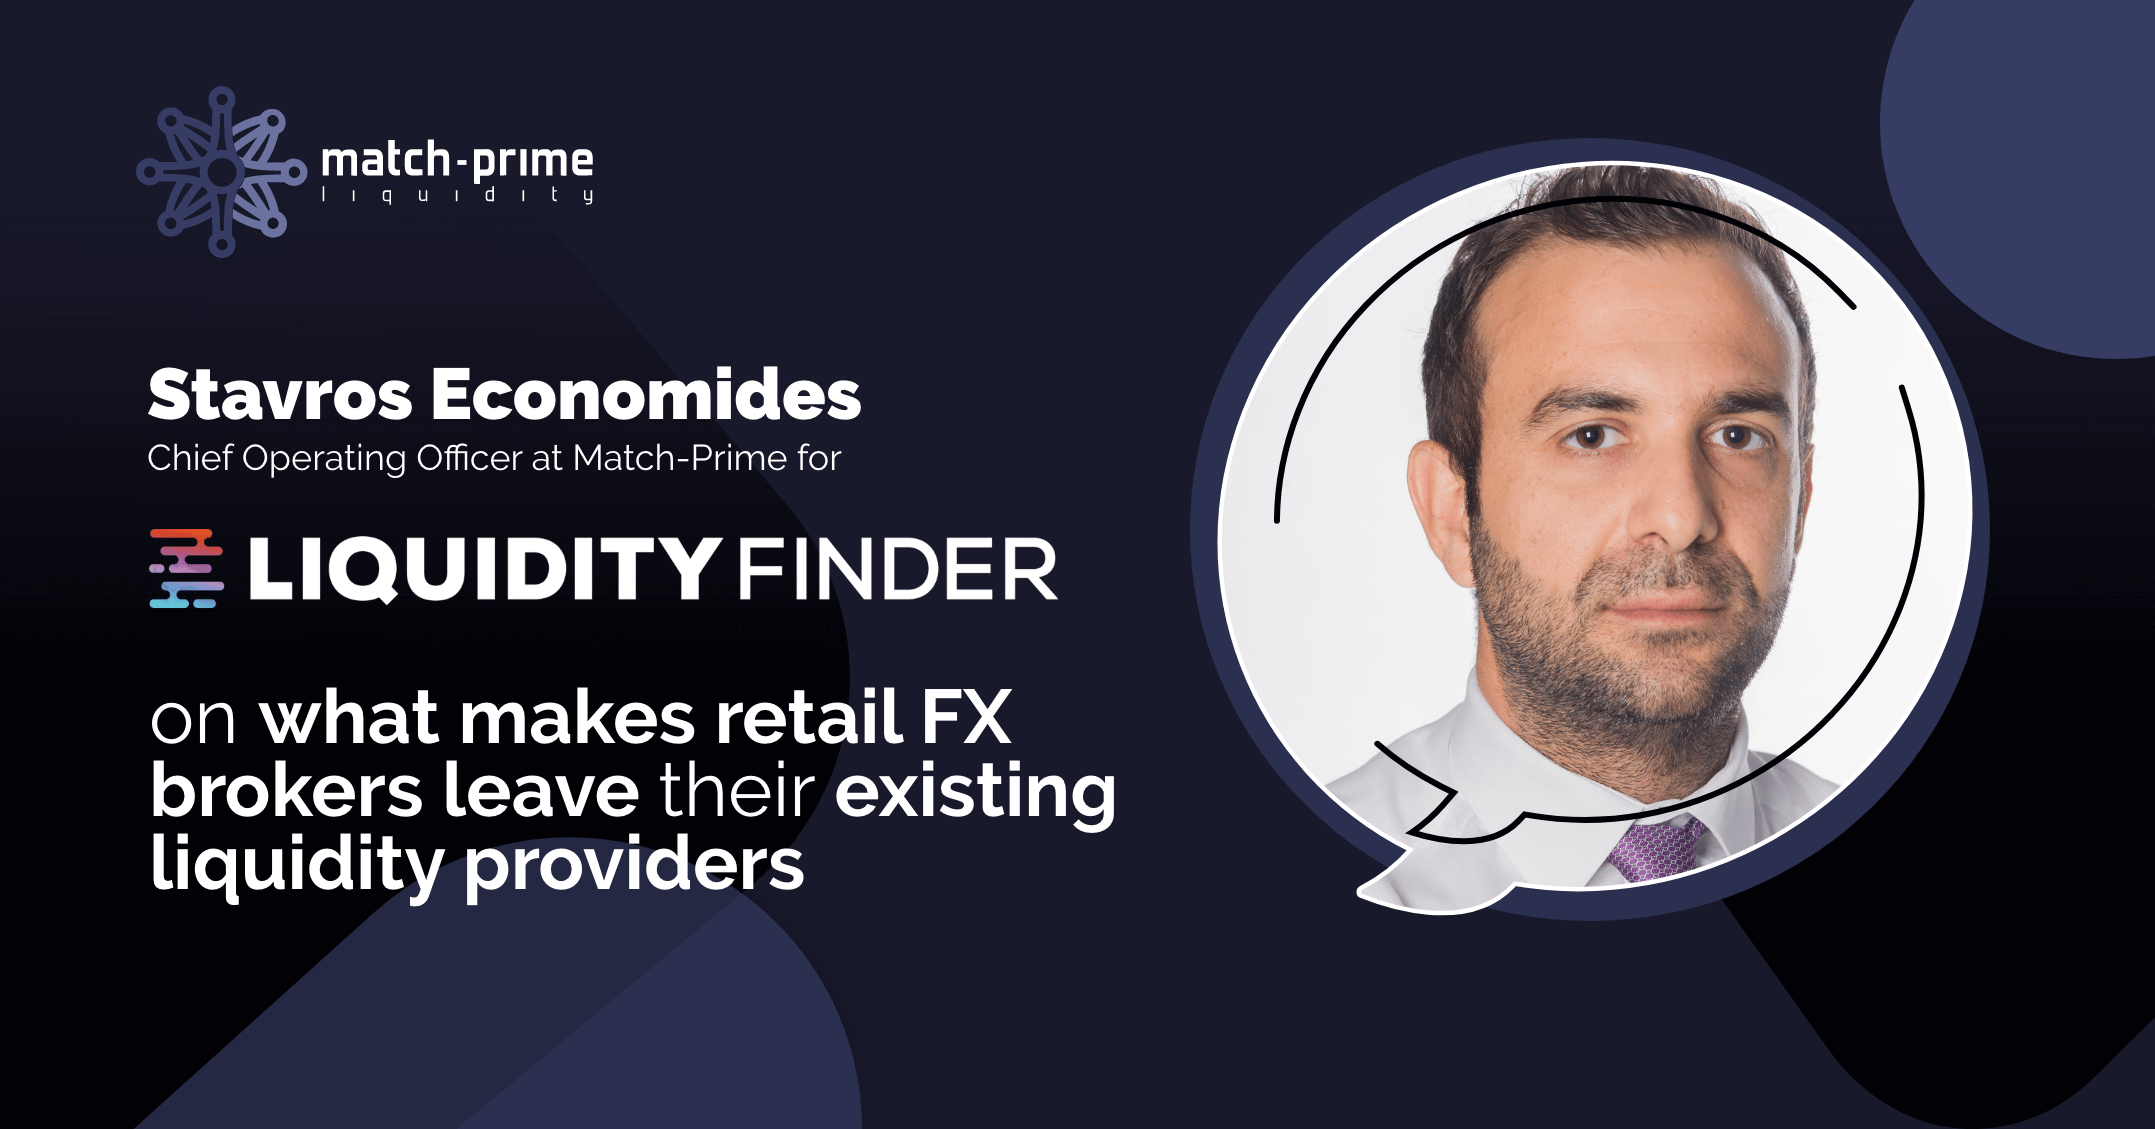 Read the interview, Stavros Economides, the COO of Match-Prime gave to Sam Low of LiquidityFinder.com